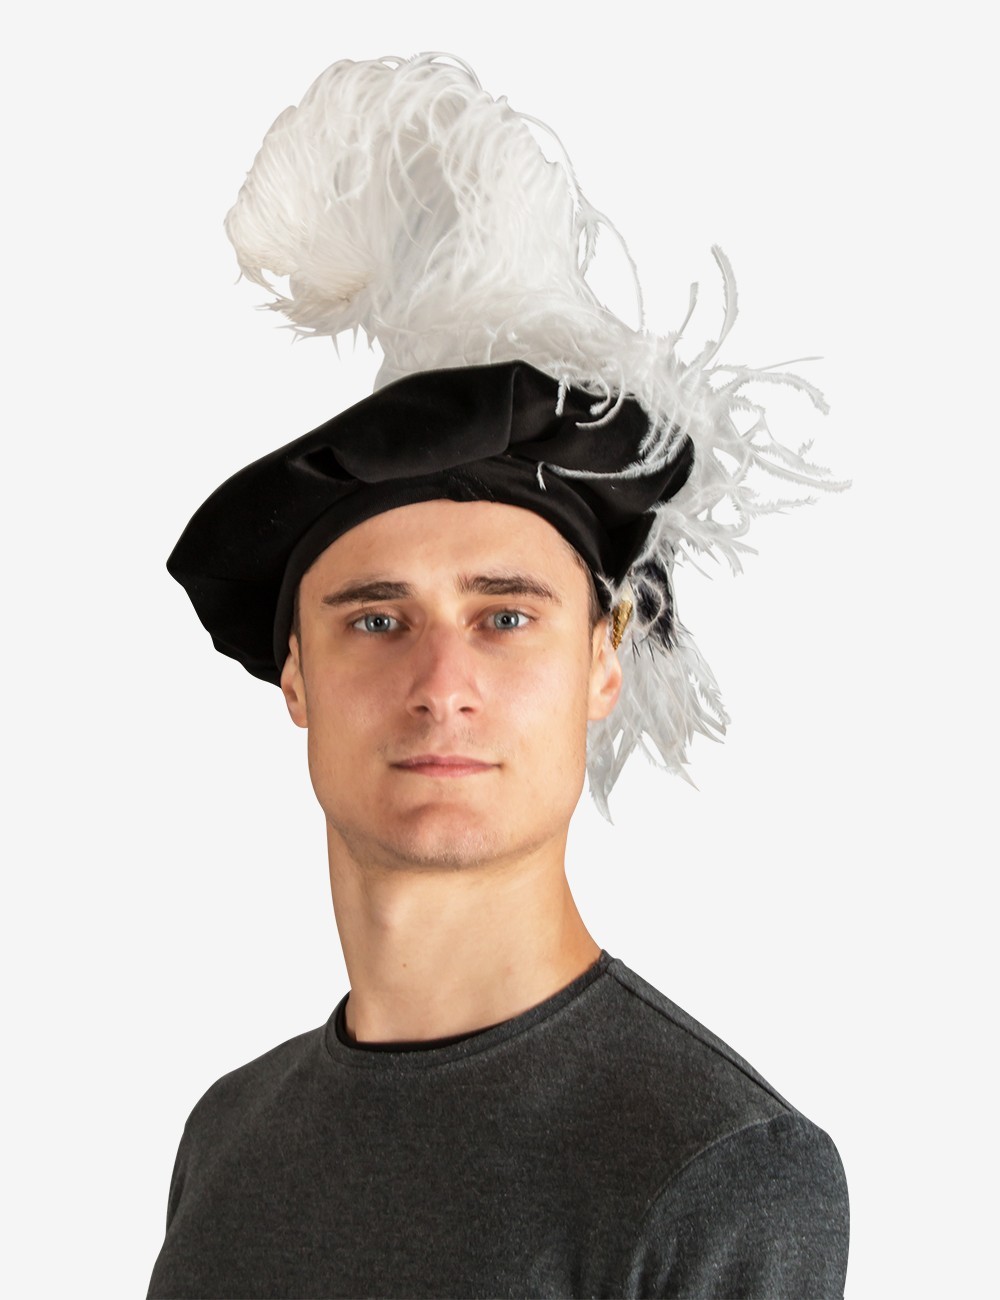 Man wearing a medieval hat